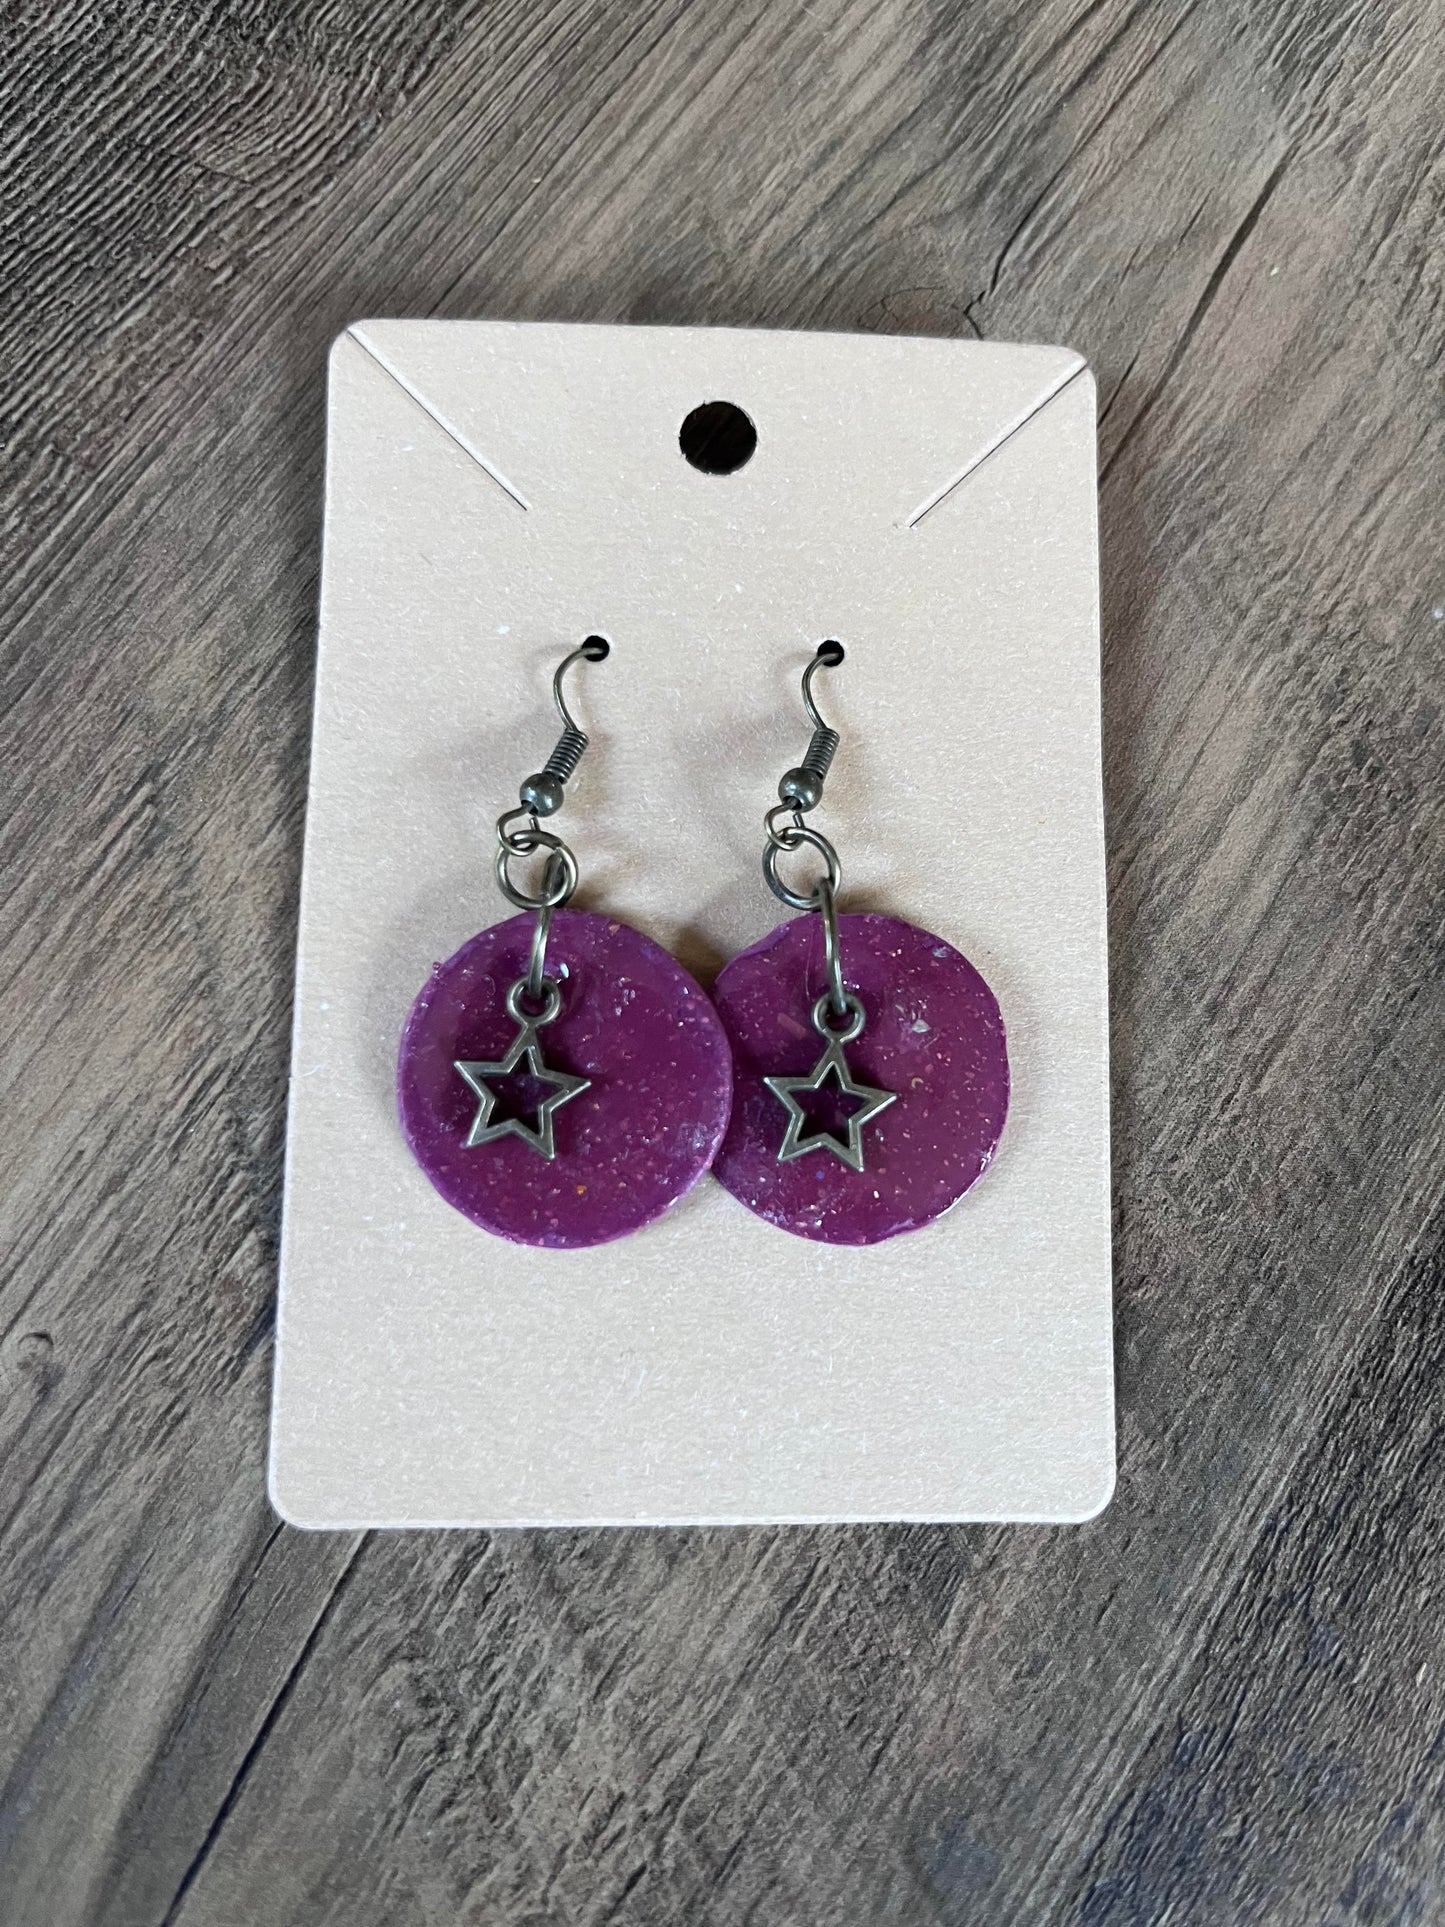 Clay Jewelry in "Burgundy Star" Collection